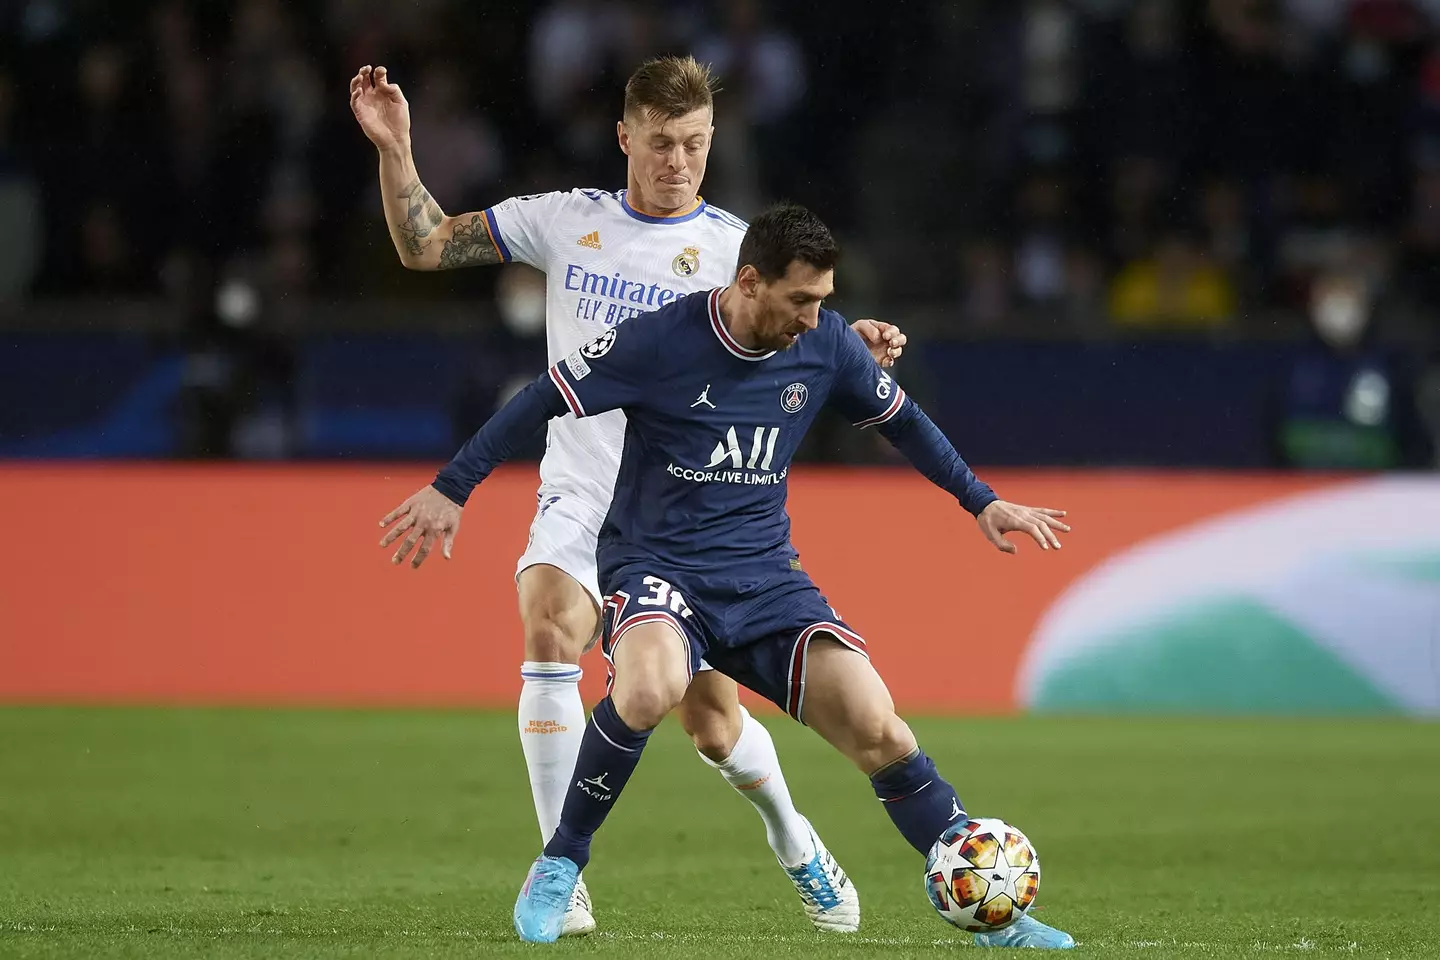 Kroos attempts to dispossess Messi during Real Madrid's Champions League game with Paris Saint-Germain last season. (Image